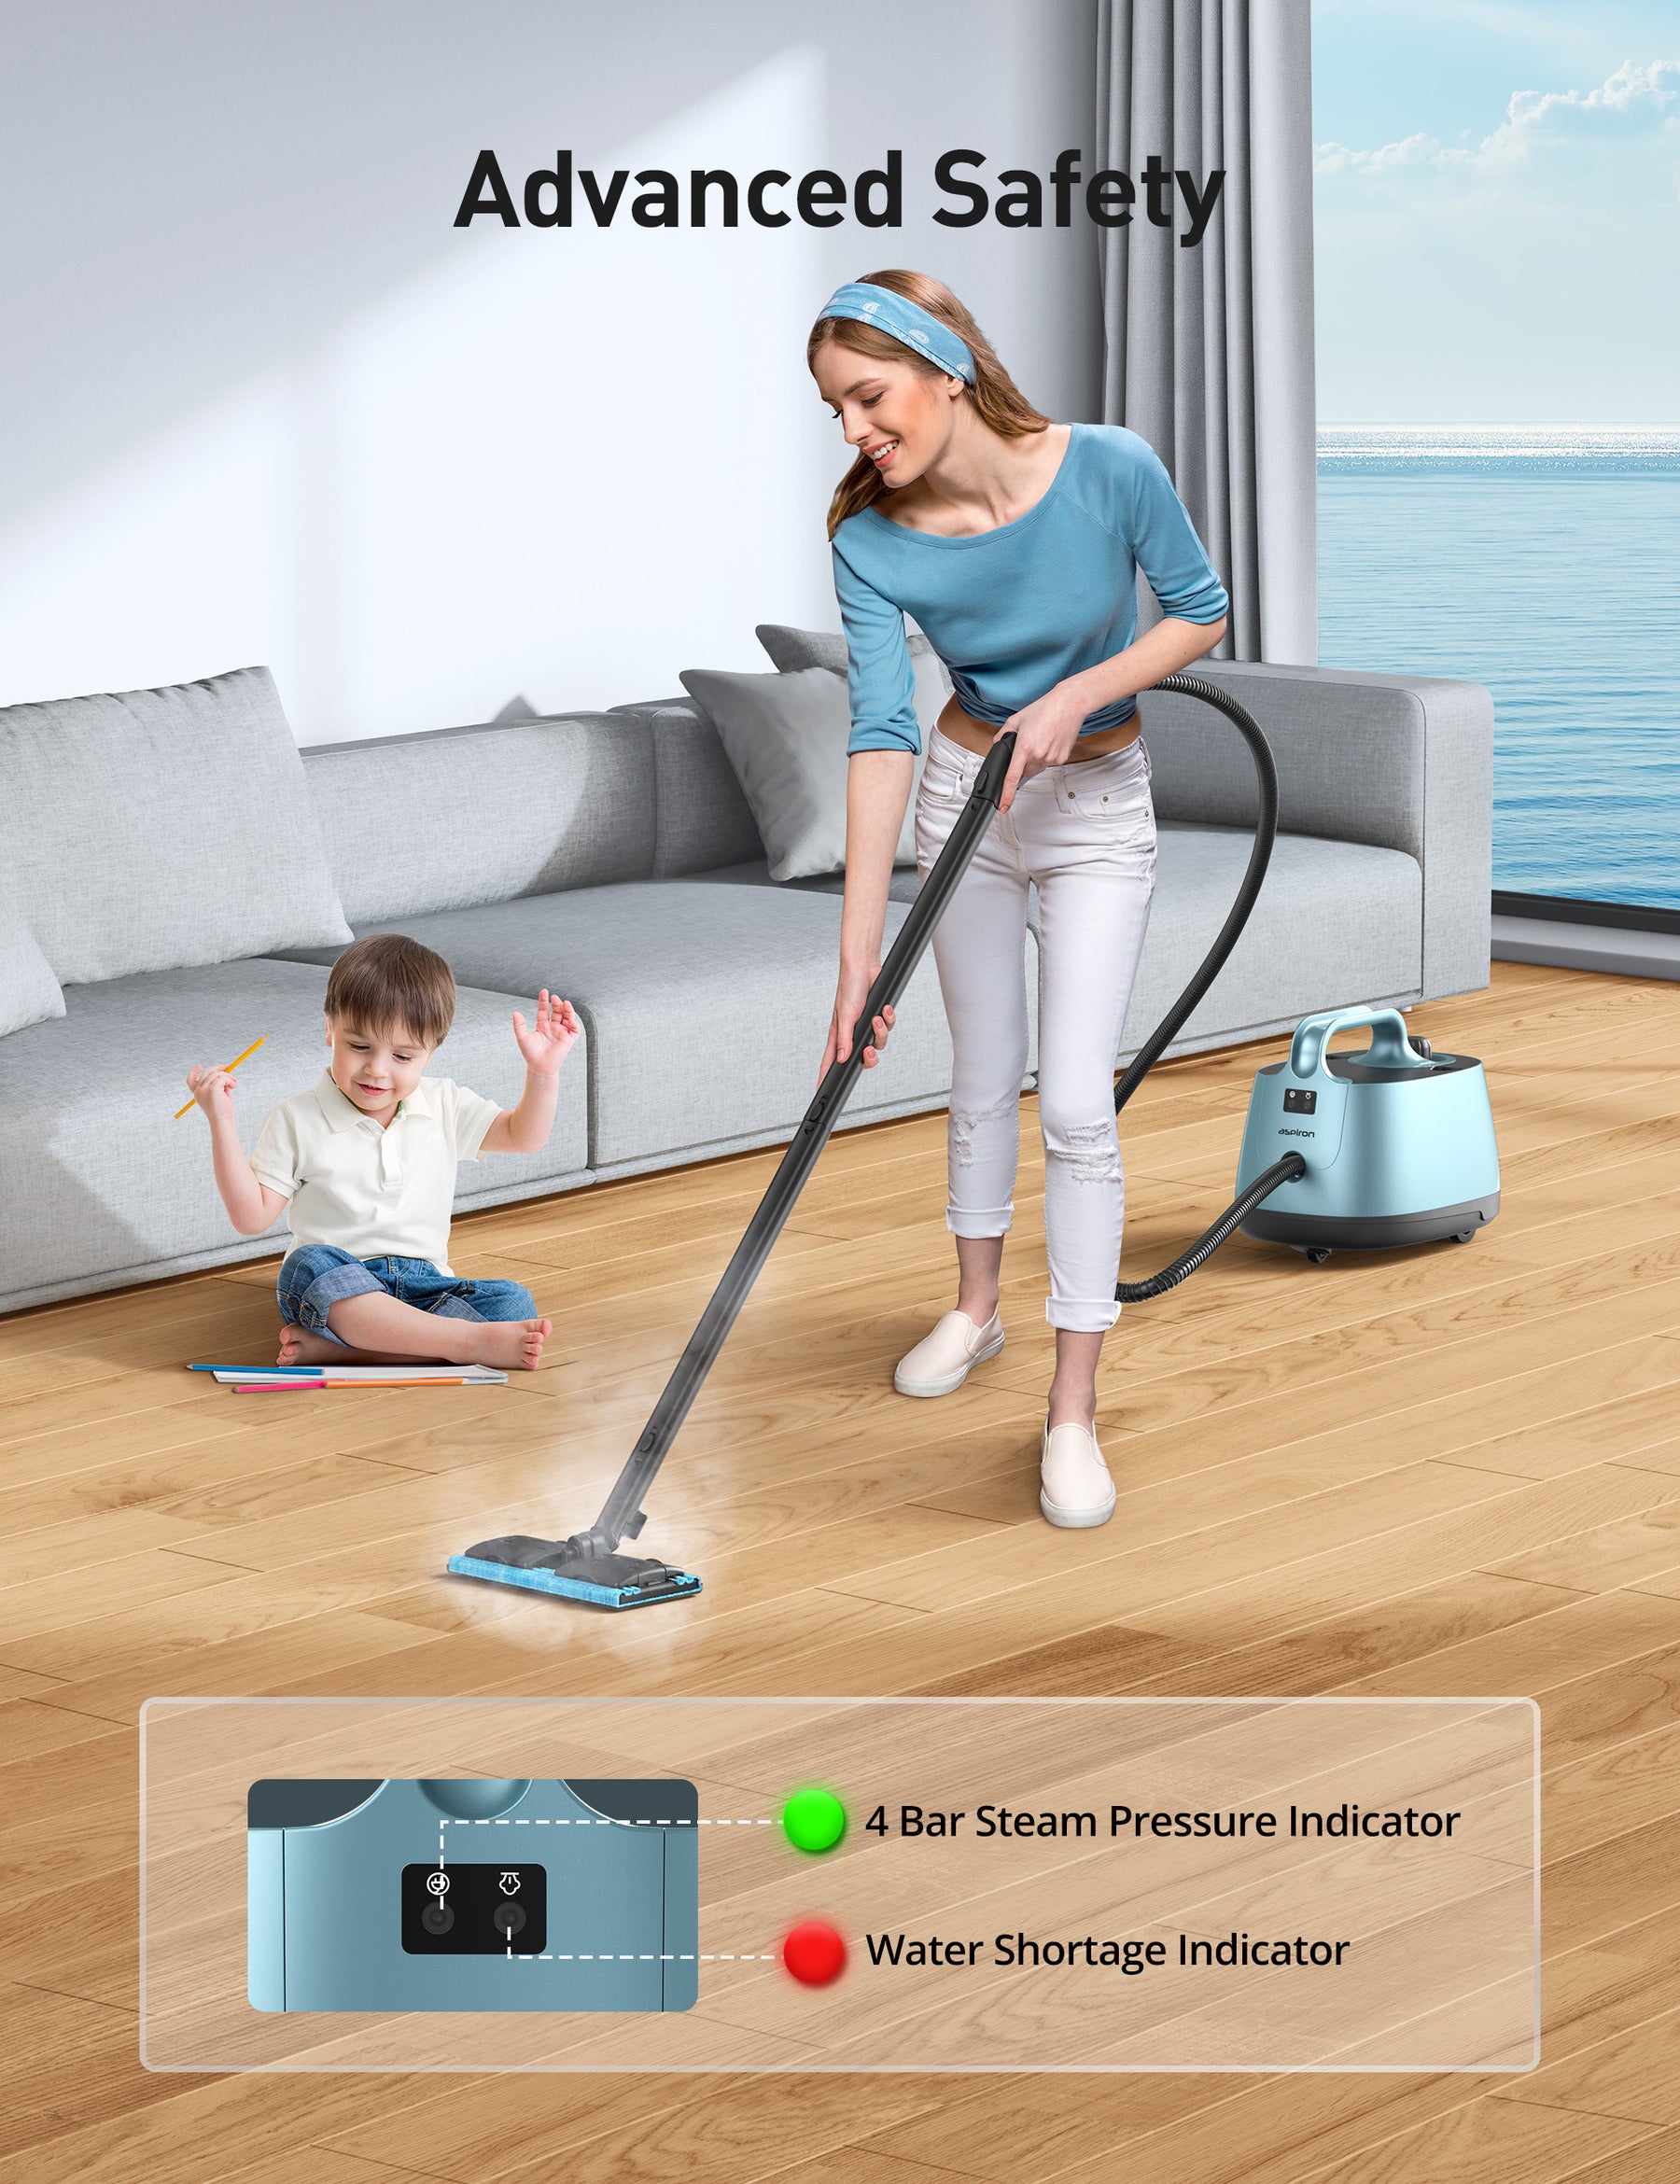 Aspiron Carpet Cleaner Machine, Upholstery Cleaner Machine with 2 Cleaning  Tools, Dual Large Tanks, Portable Lightweight Spot Cleaner Machine for Pet